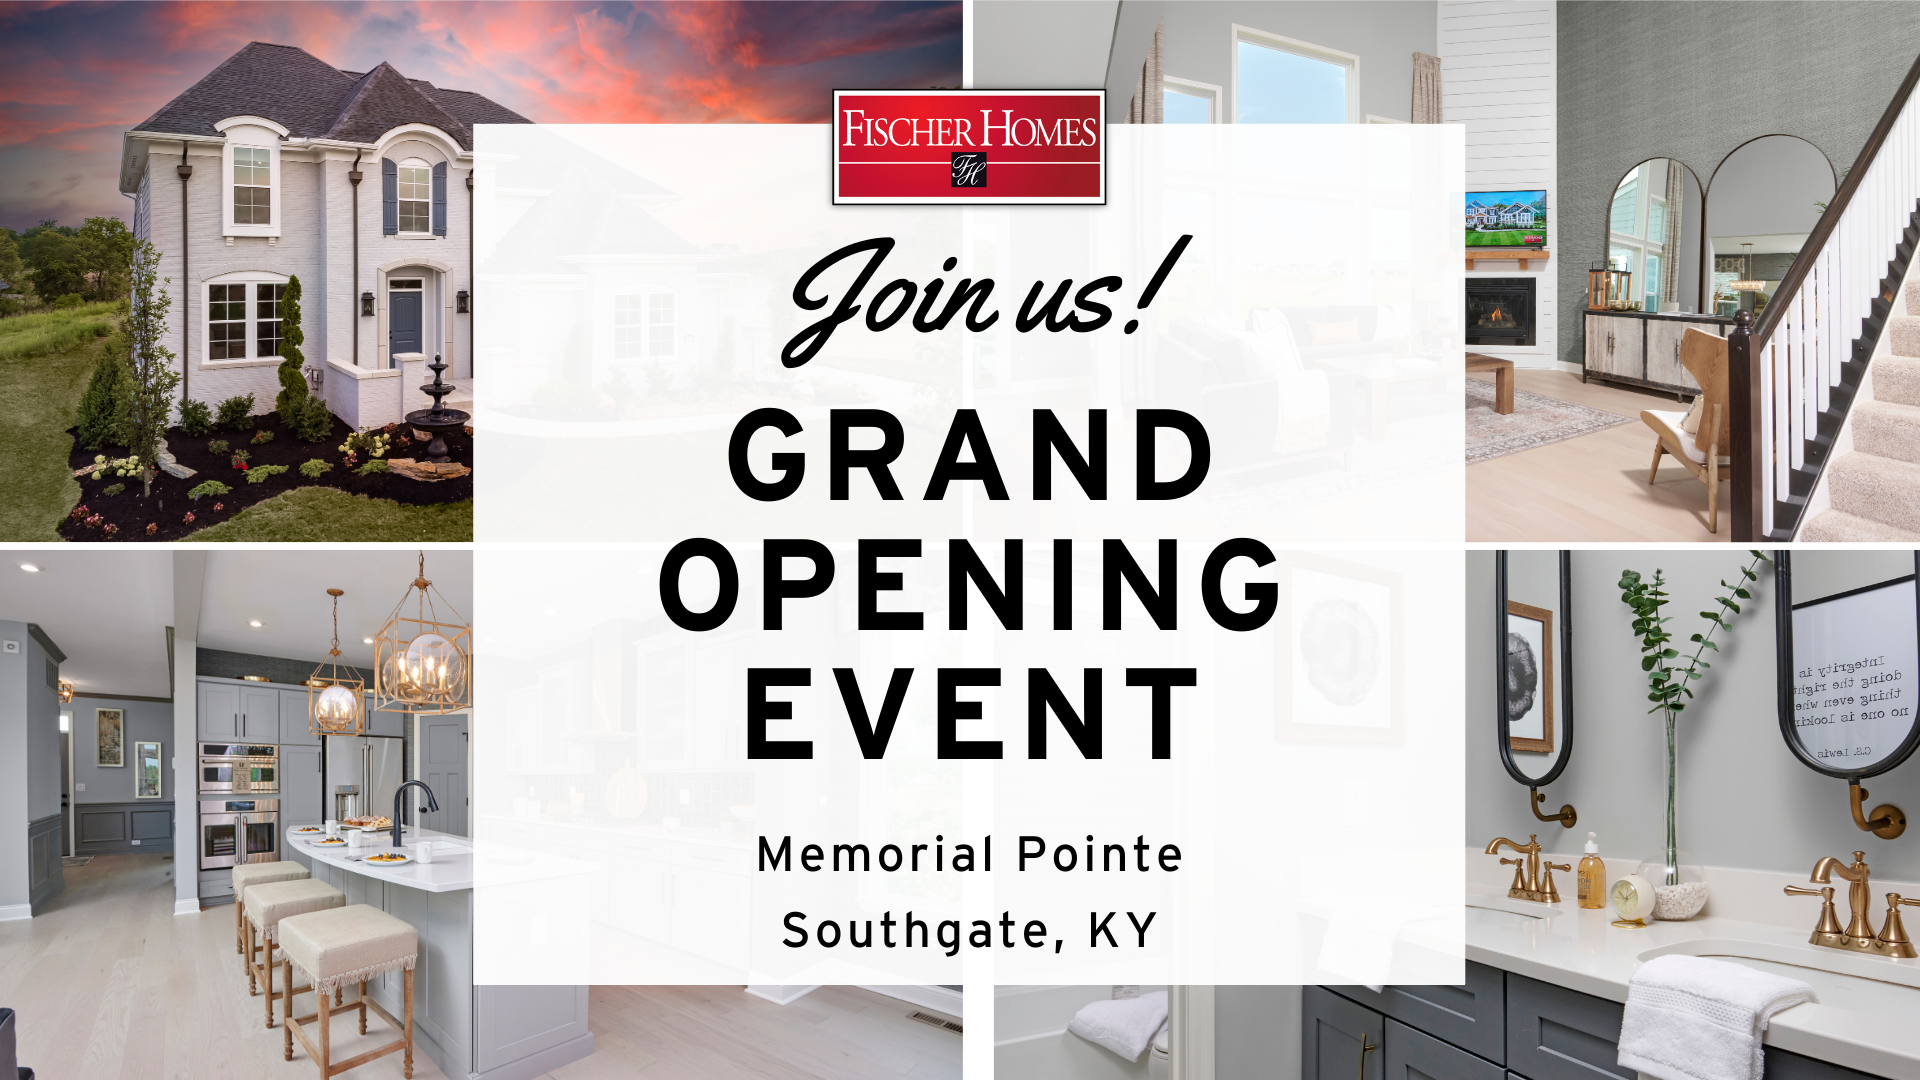 Model Grand Opening Event at Memorial Pointe in Southgate, KY!